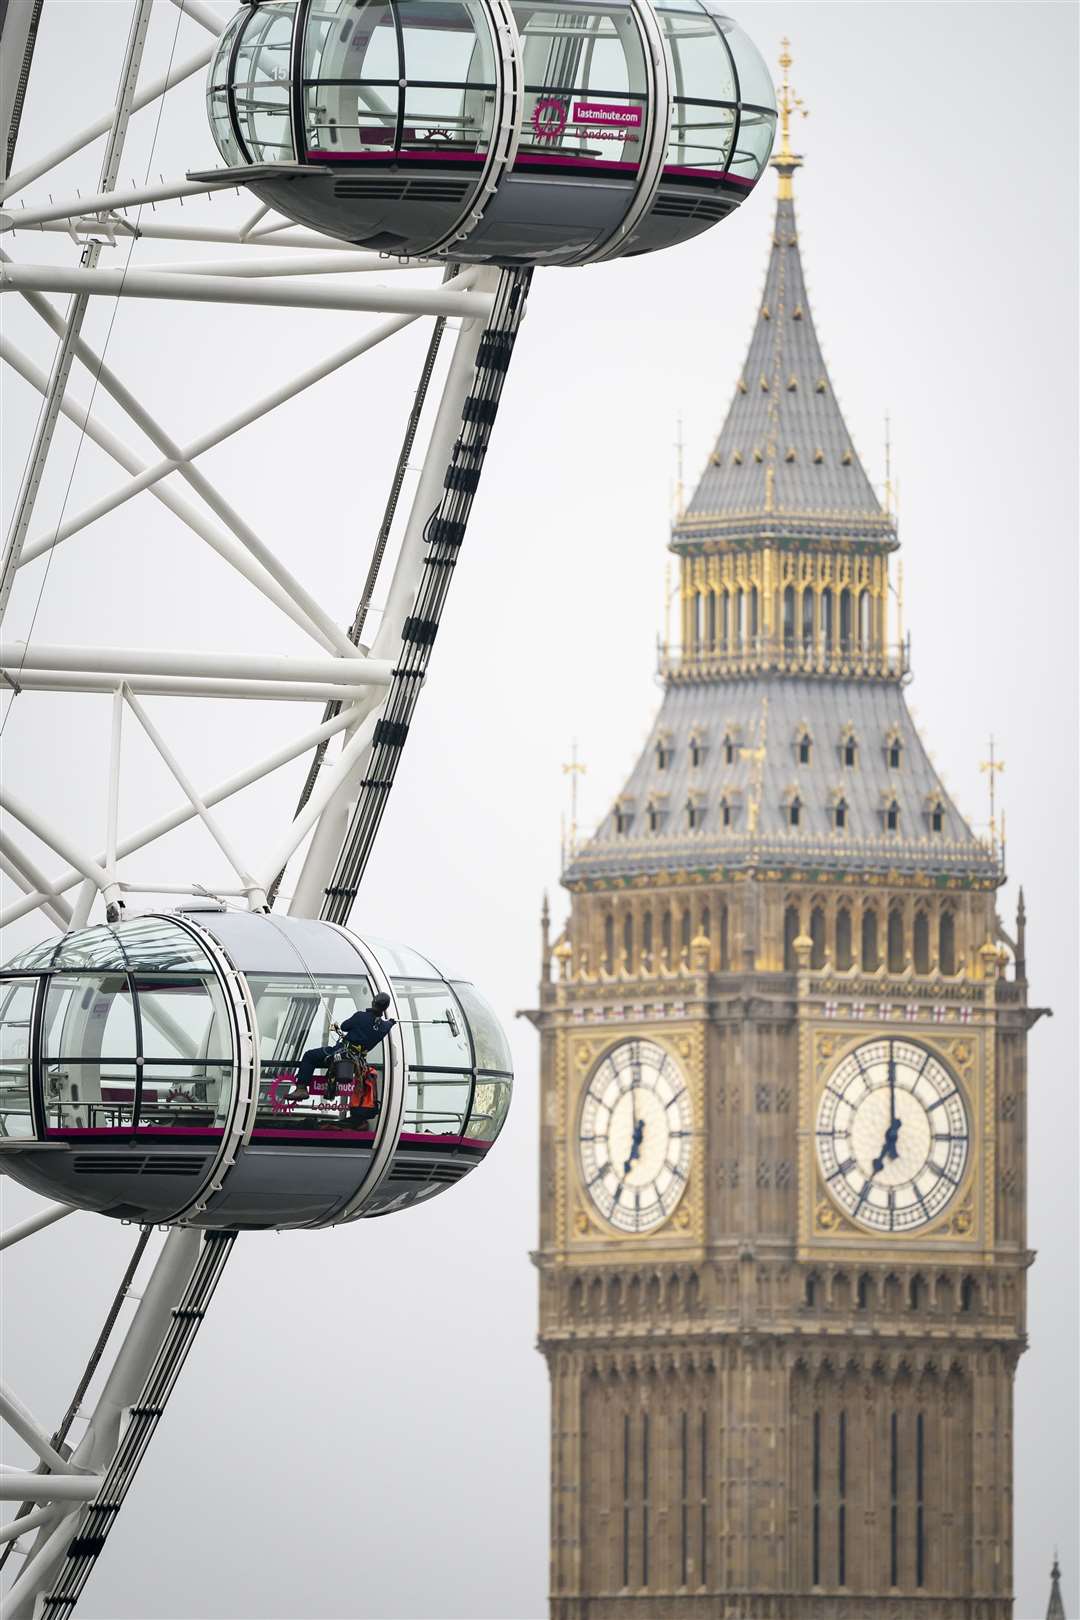 Each of London Eye’s 32 capsules were cleaned ready for the millions of visitors expected this year (Aaron Chown/PA Wire)